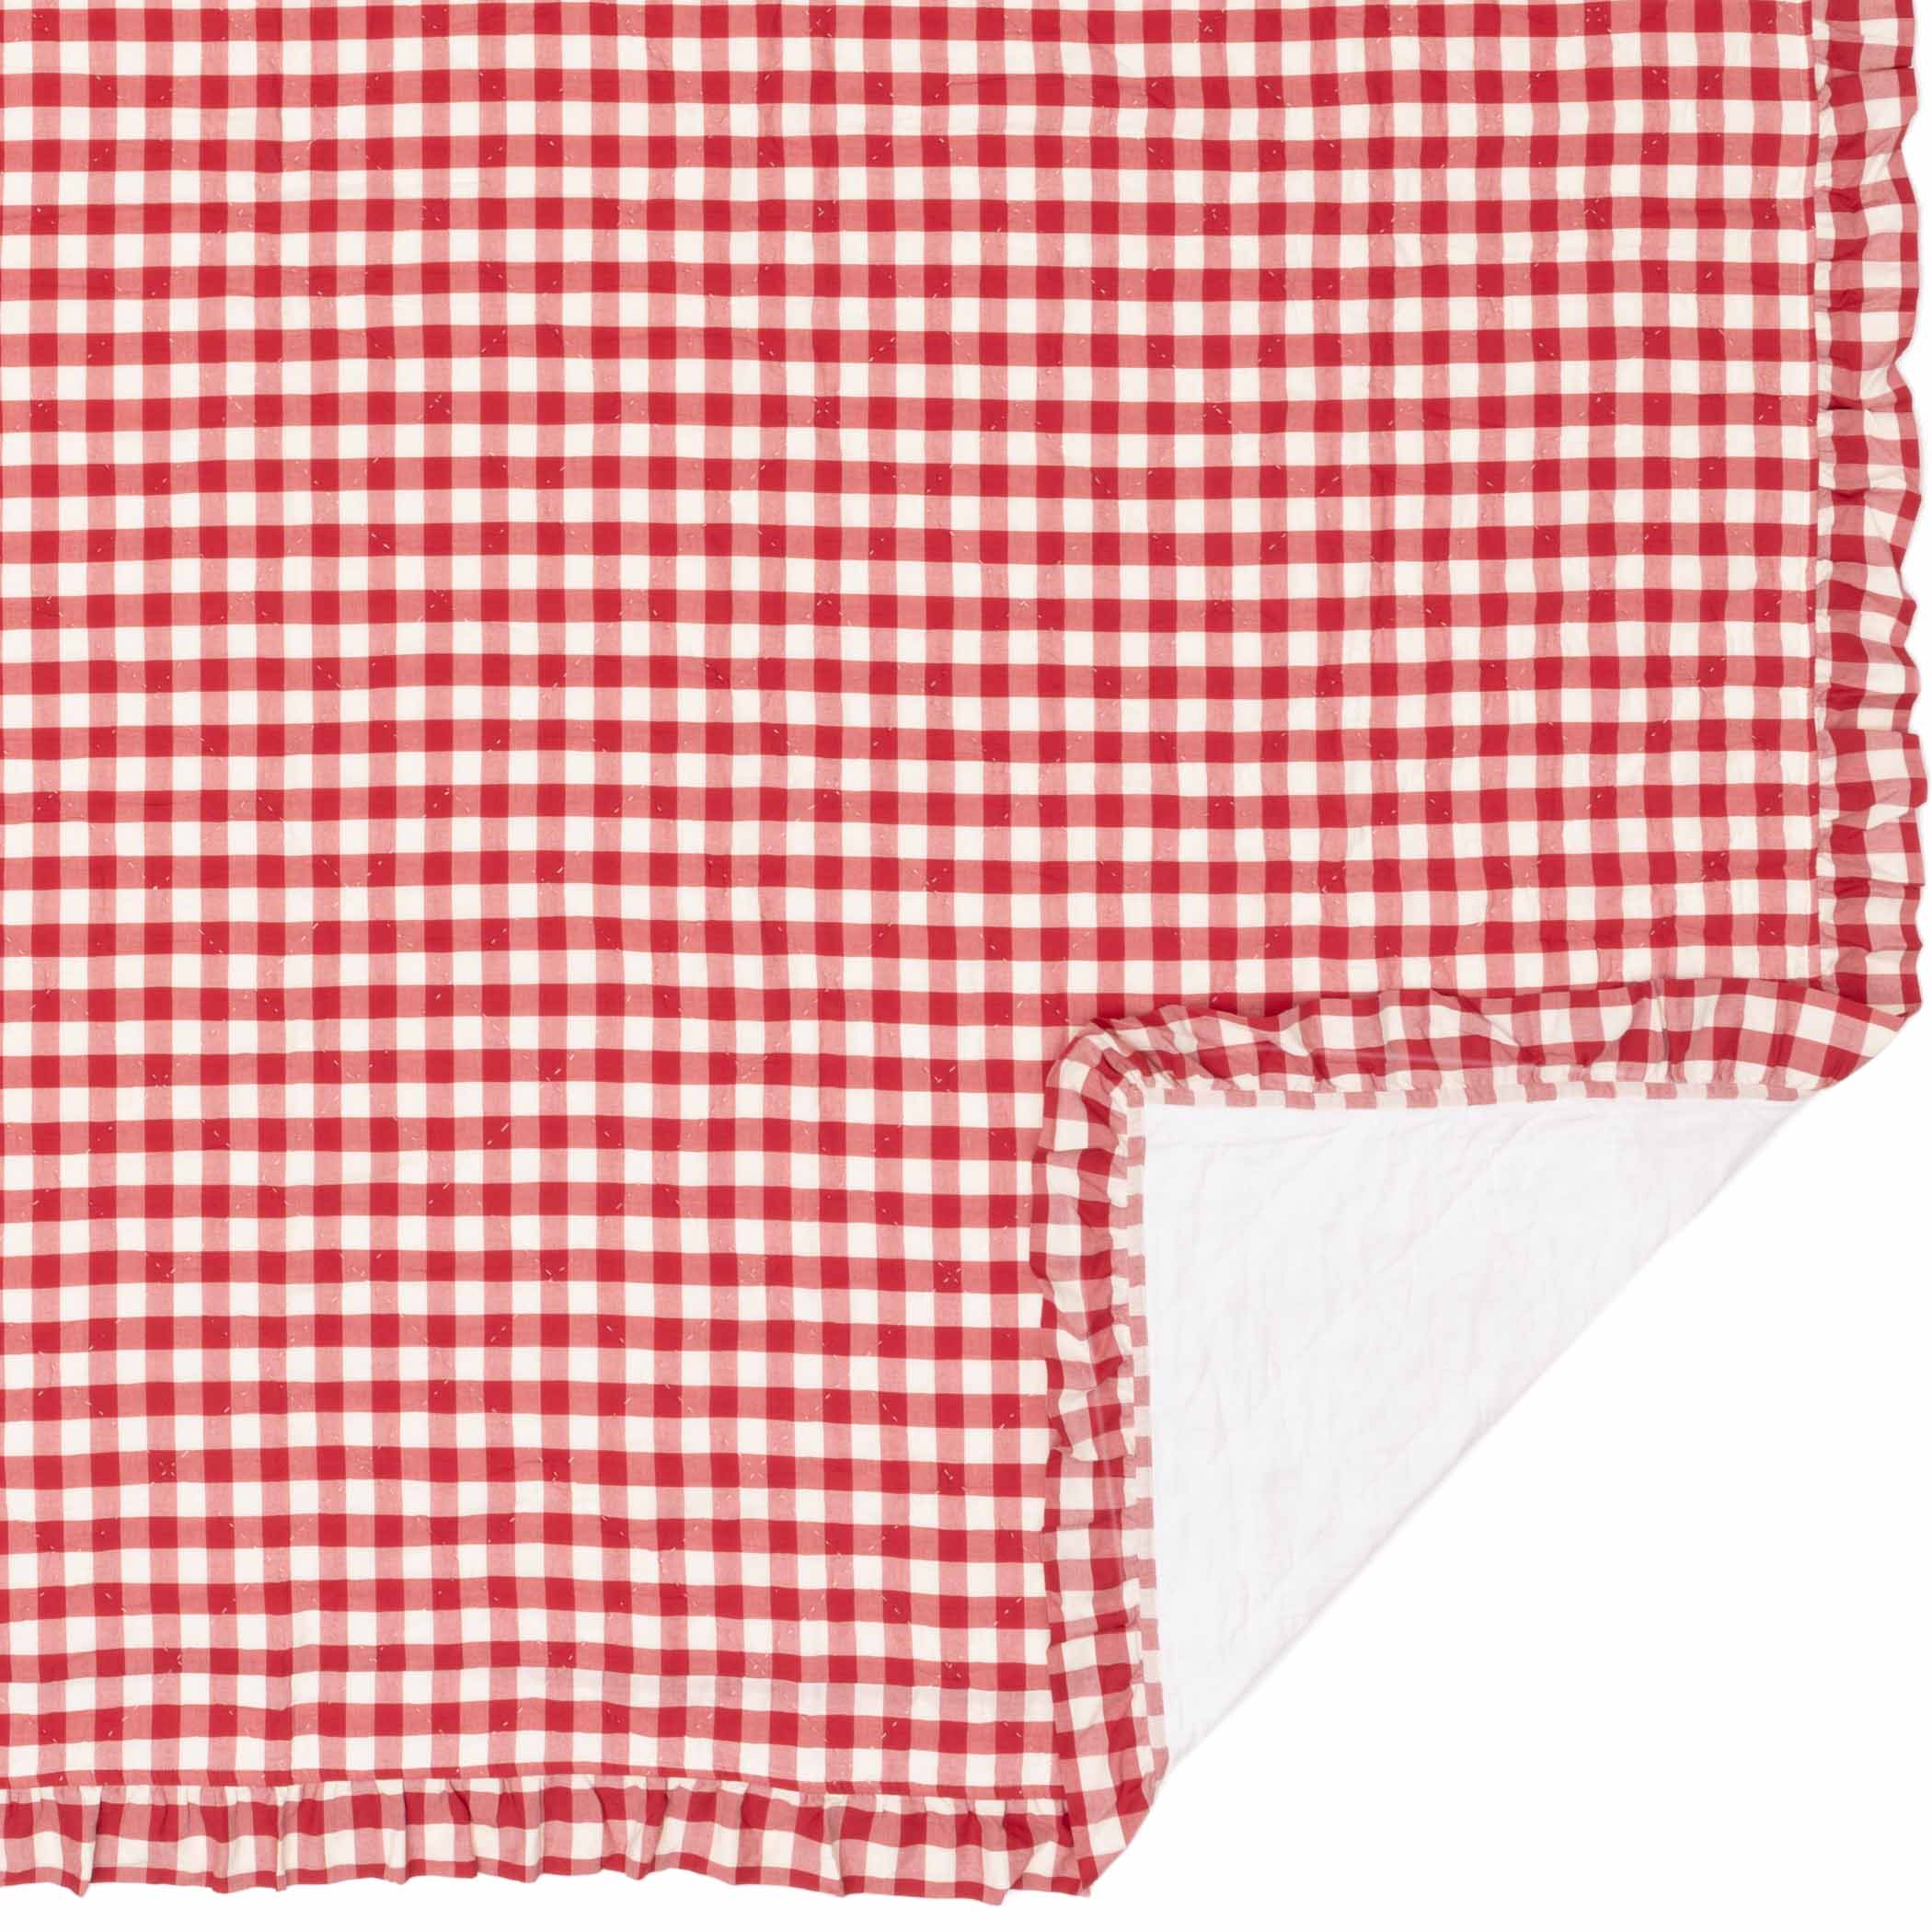 April & Olive Annie Buffalo Red Check Ruffled King Quilt Coverlet 105Wx95L By VHC Brands